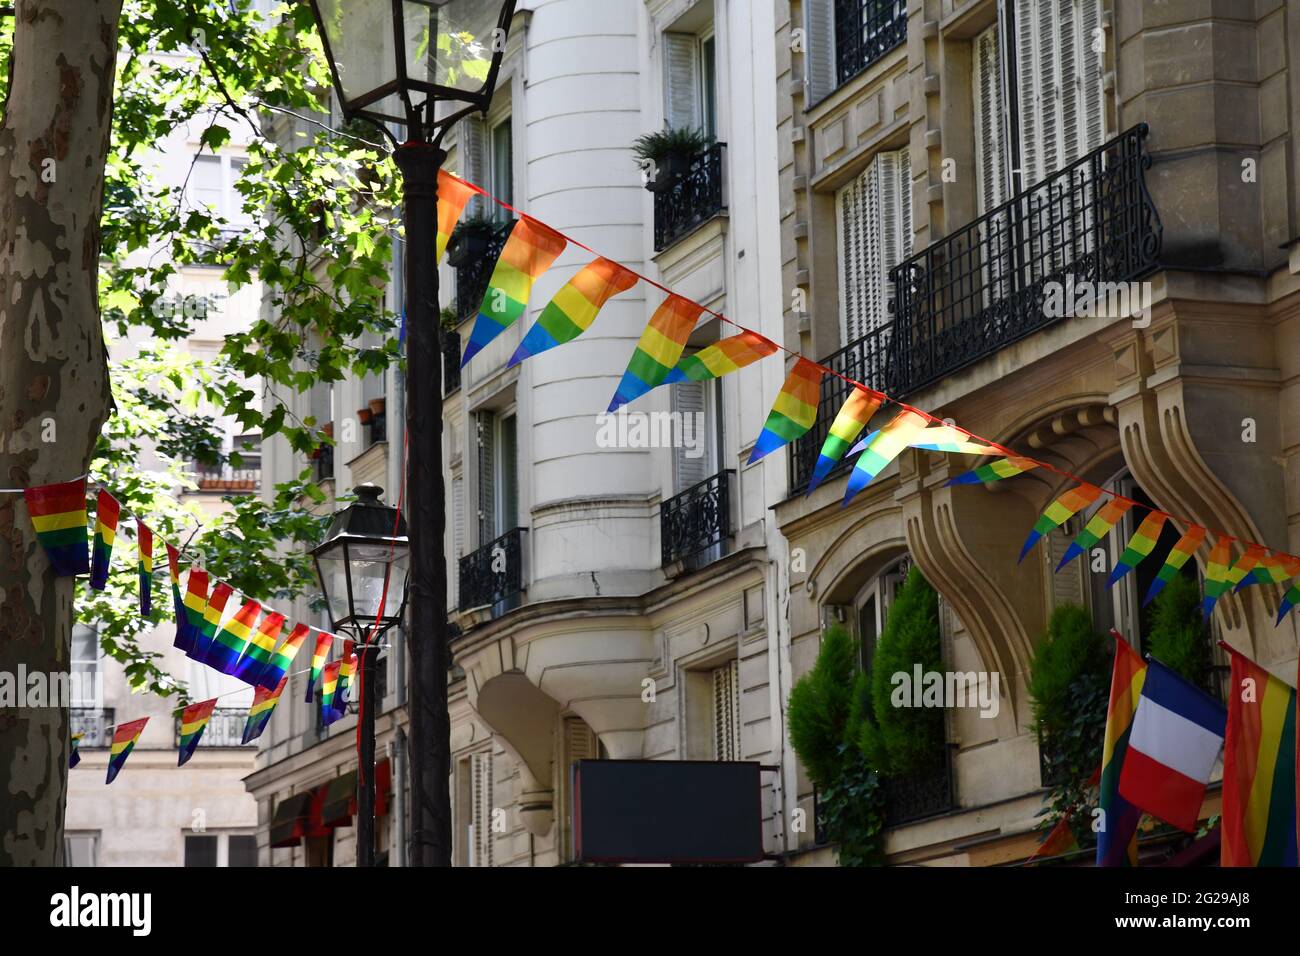 Decoration of triangle shape banners in colors of Lgbtq flags hanging between vintage lantern streetlights and ornate house with balconies. Gay pride Stock Photo